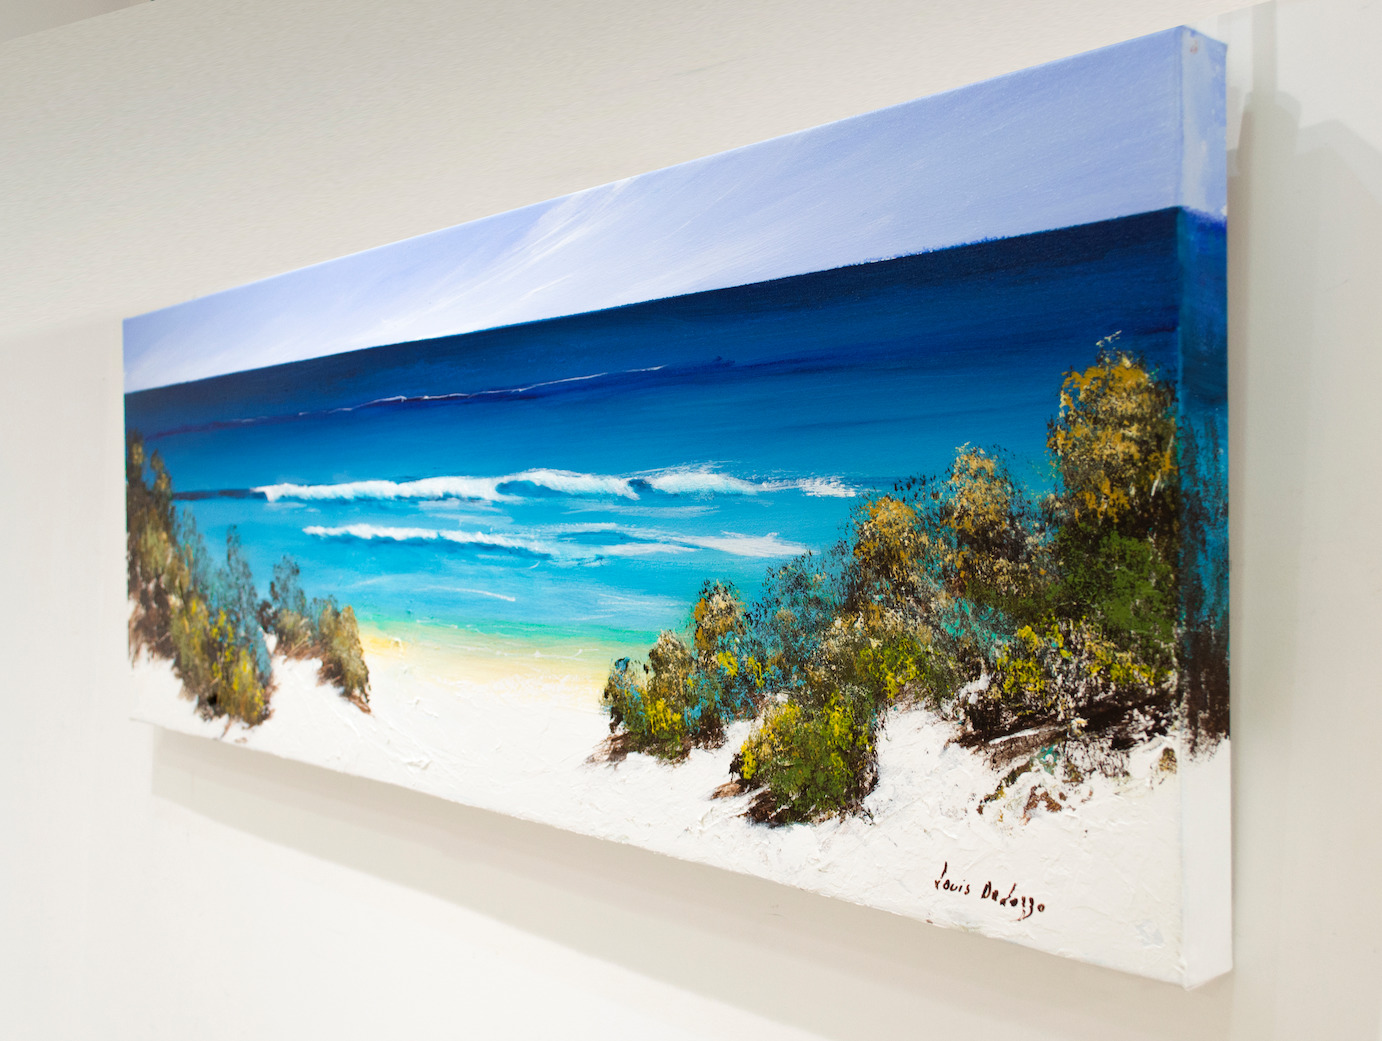 Side View Of Seascape Painting "White Shore Fraser" By Louis Dalozzo